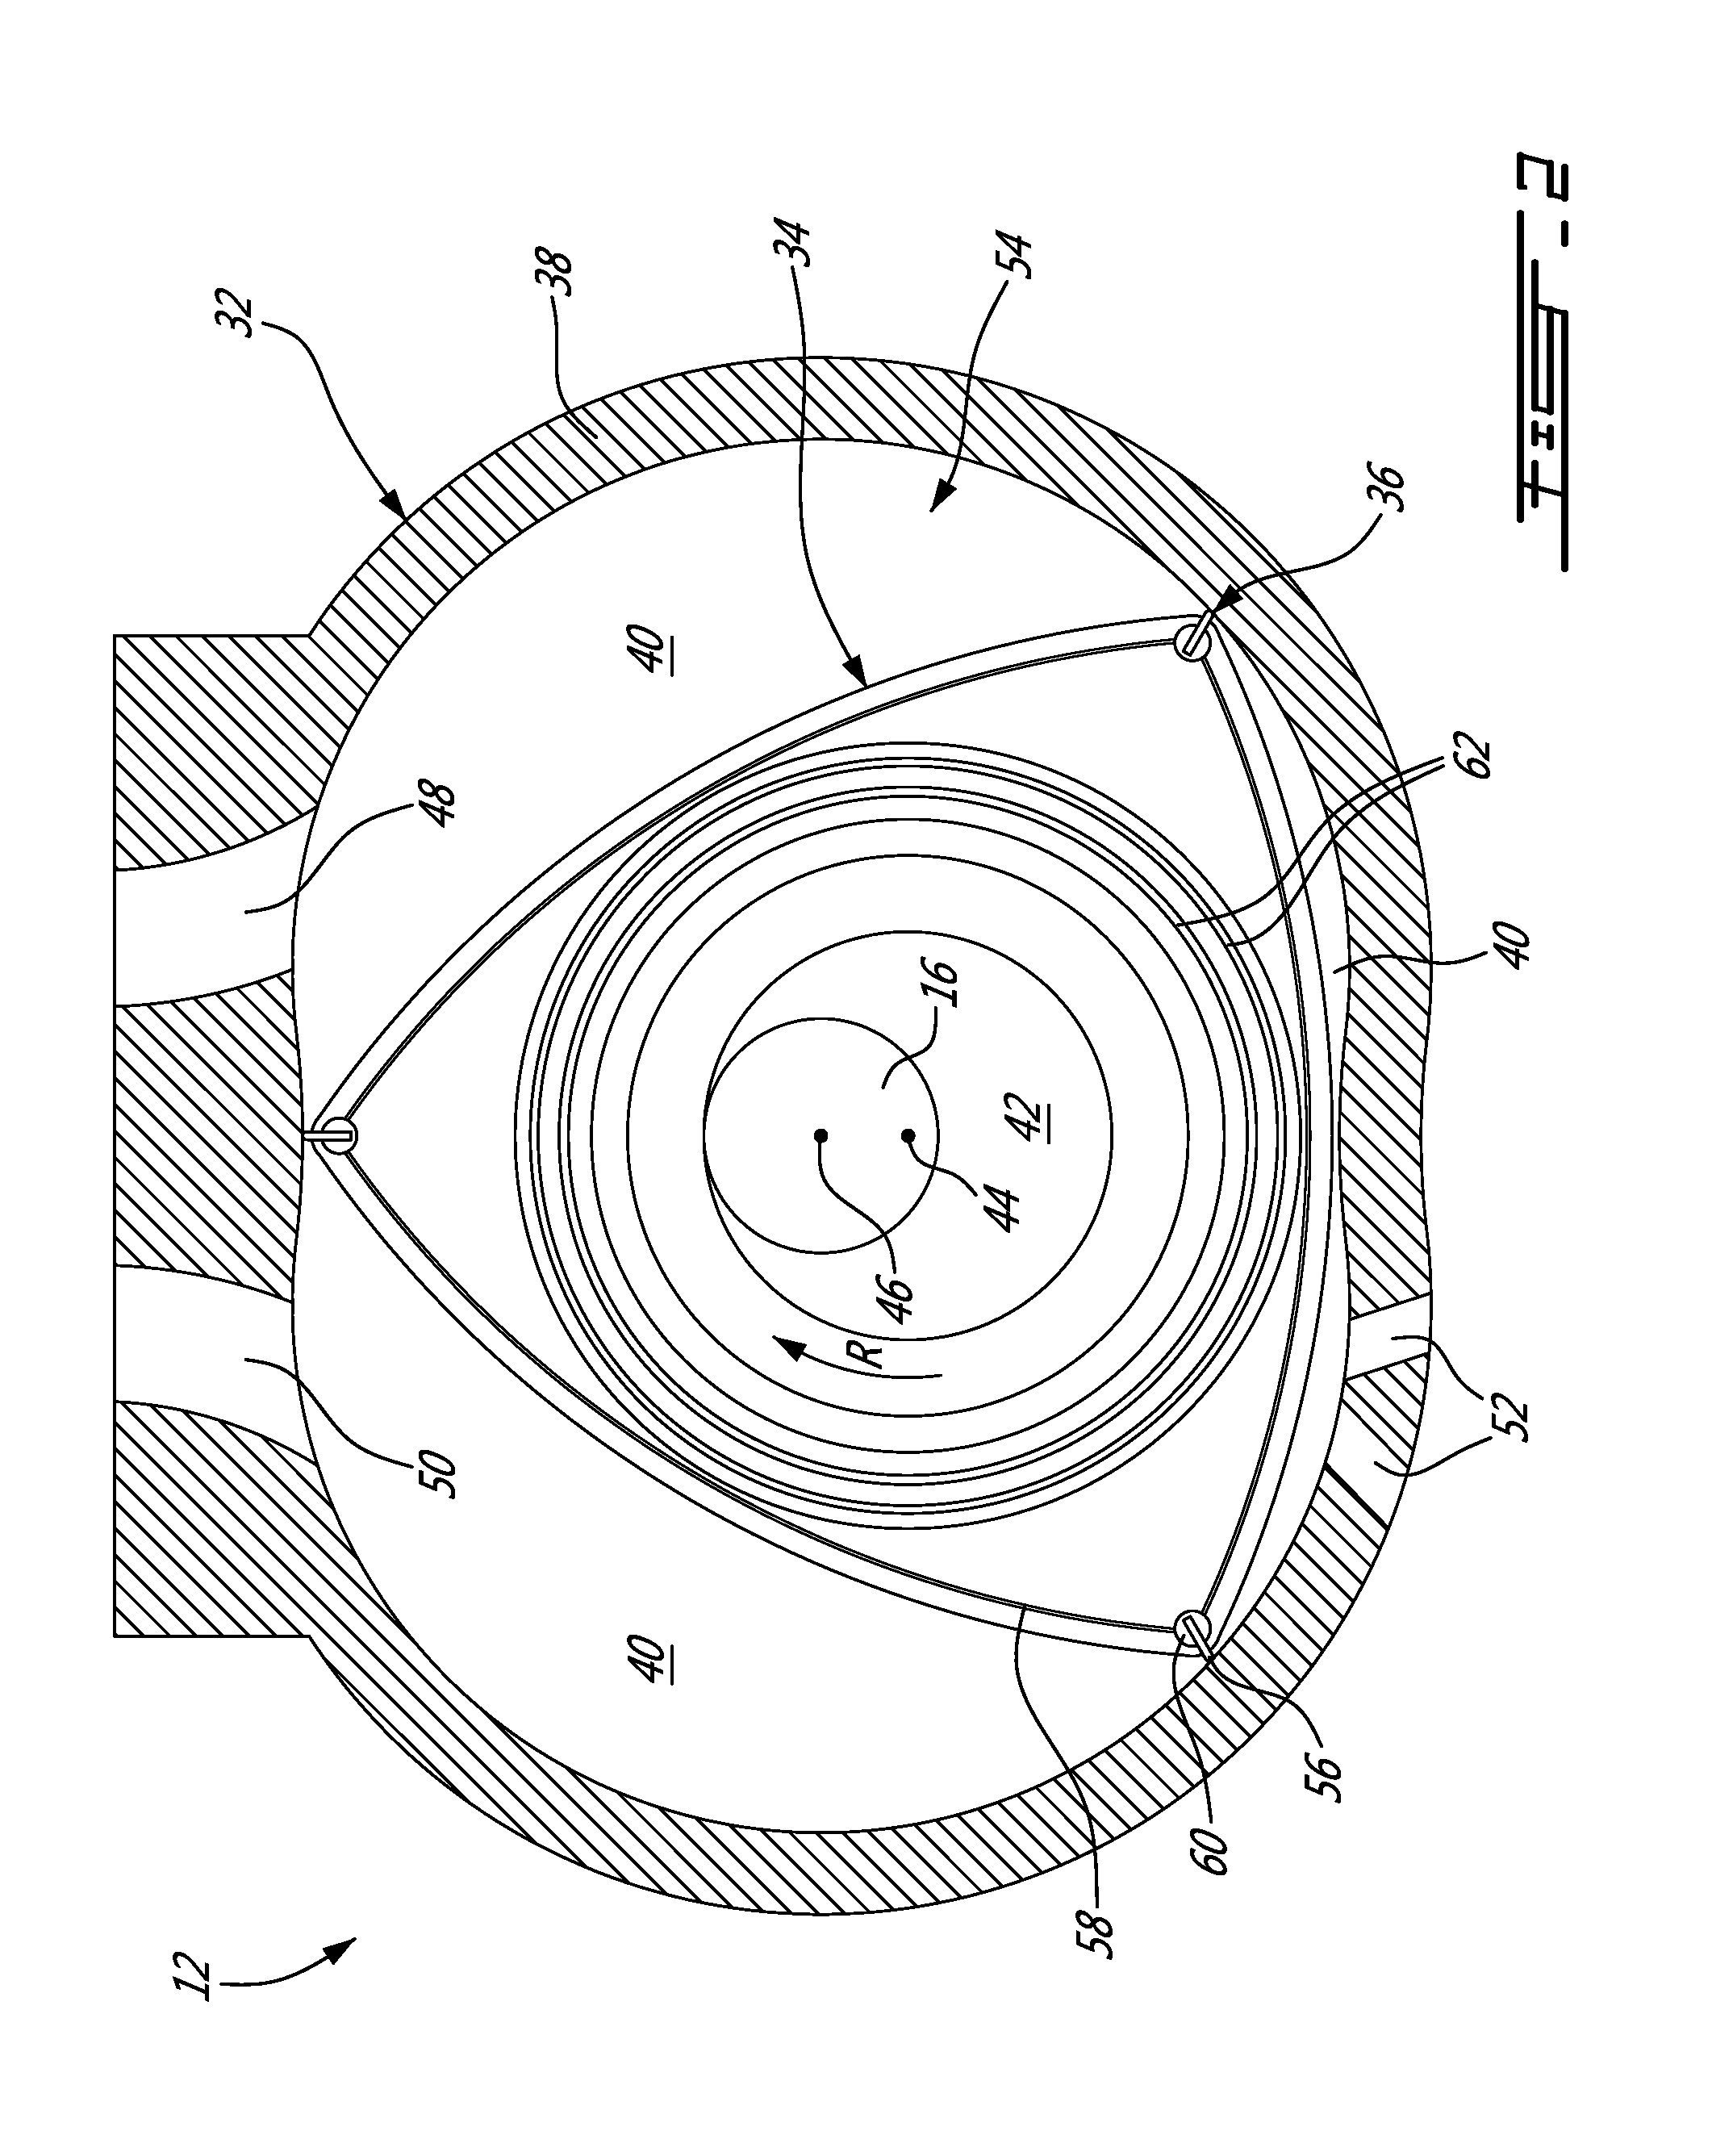 Compound engine assembly with exhaust pipe nozzle